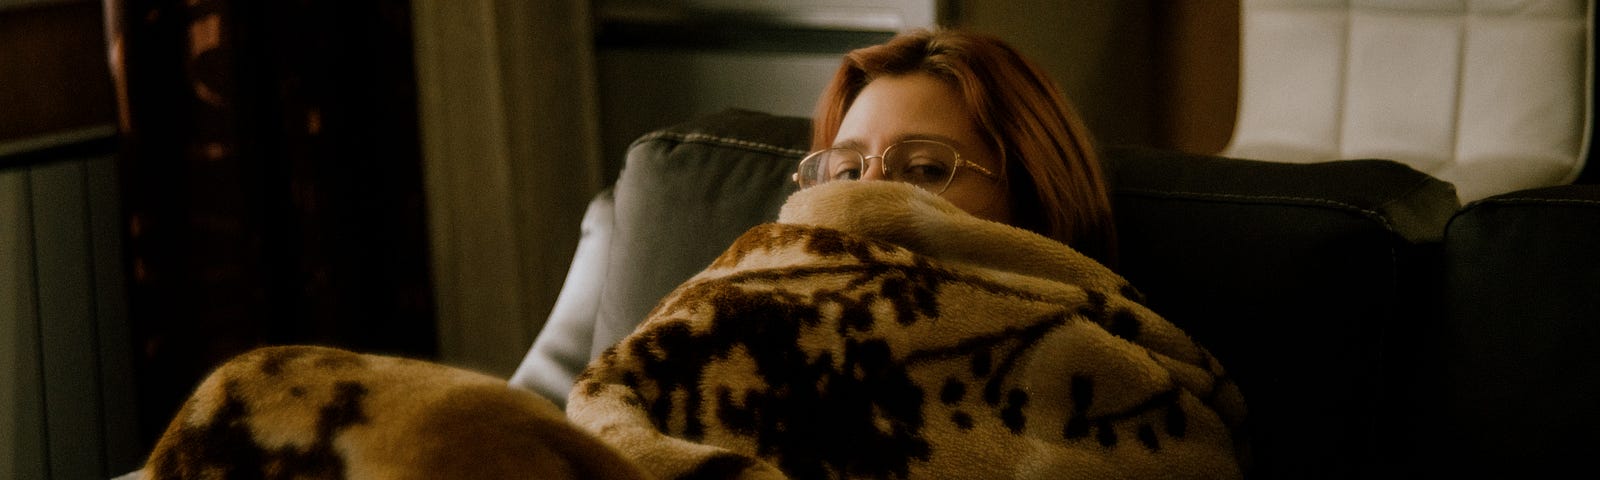 A woman snuggles into a blanket in a cold house